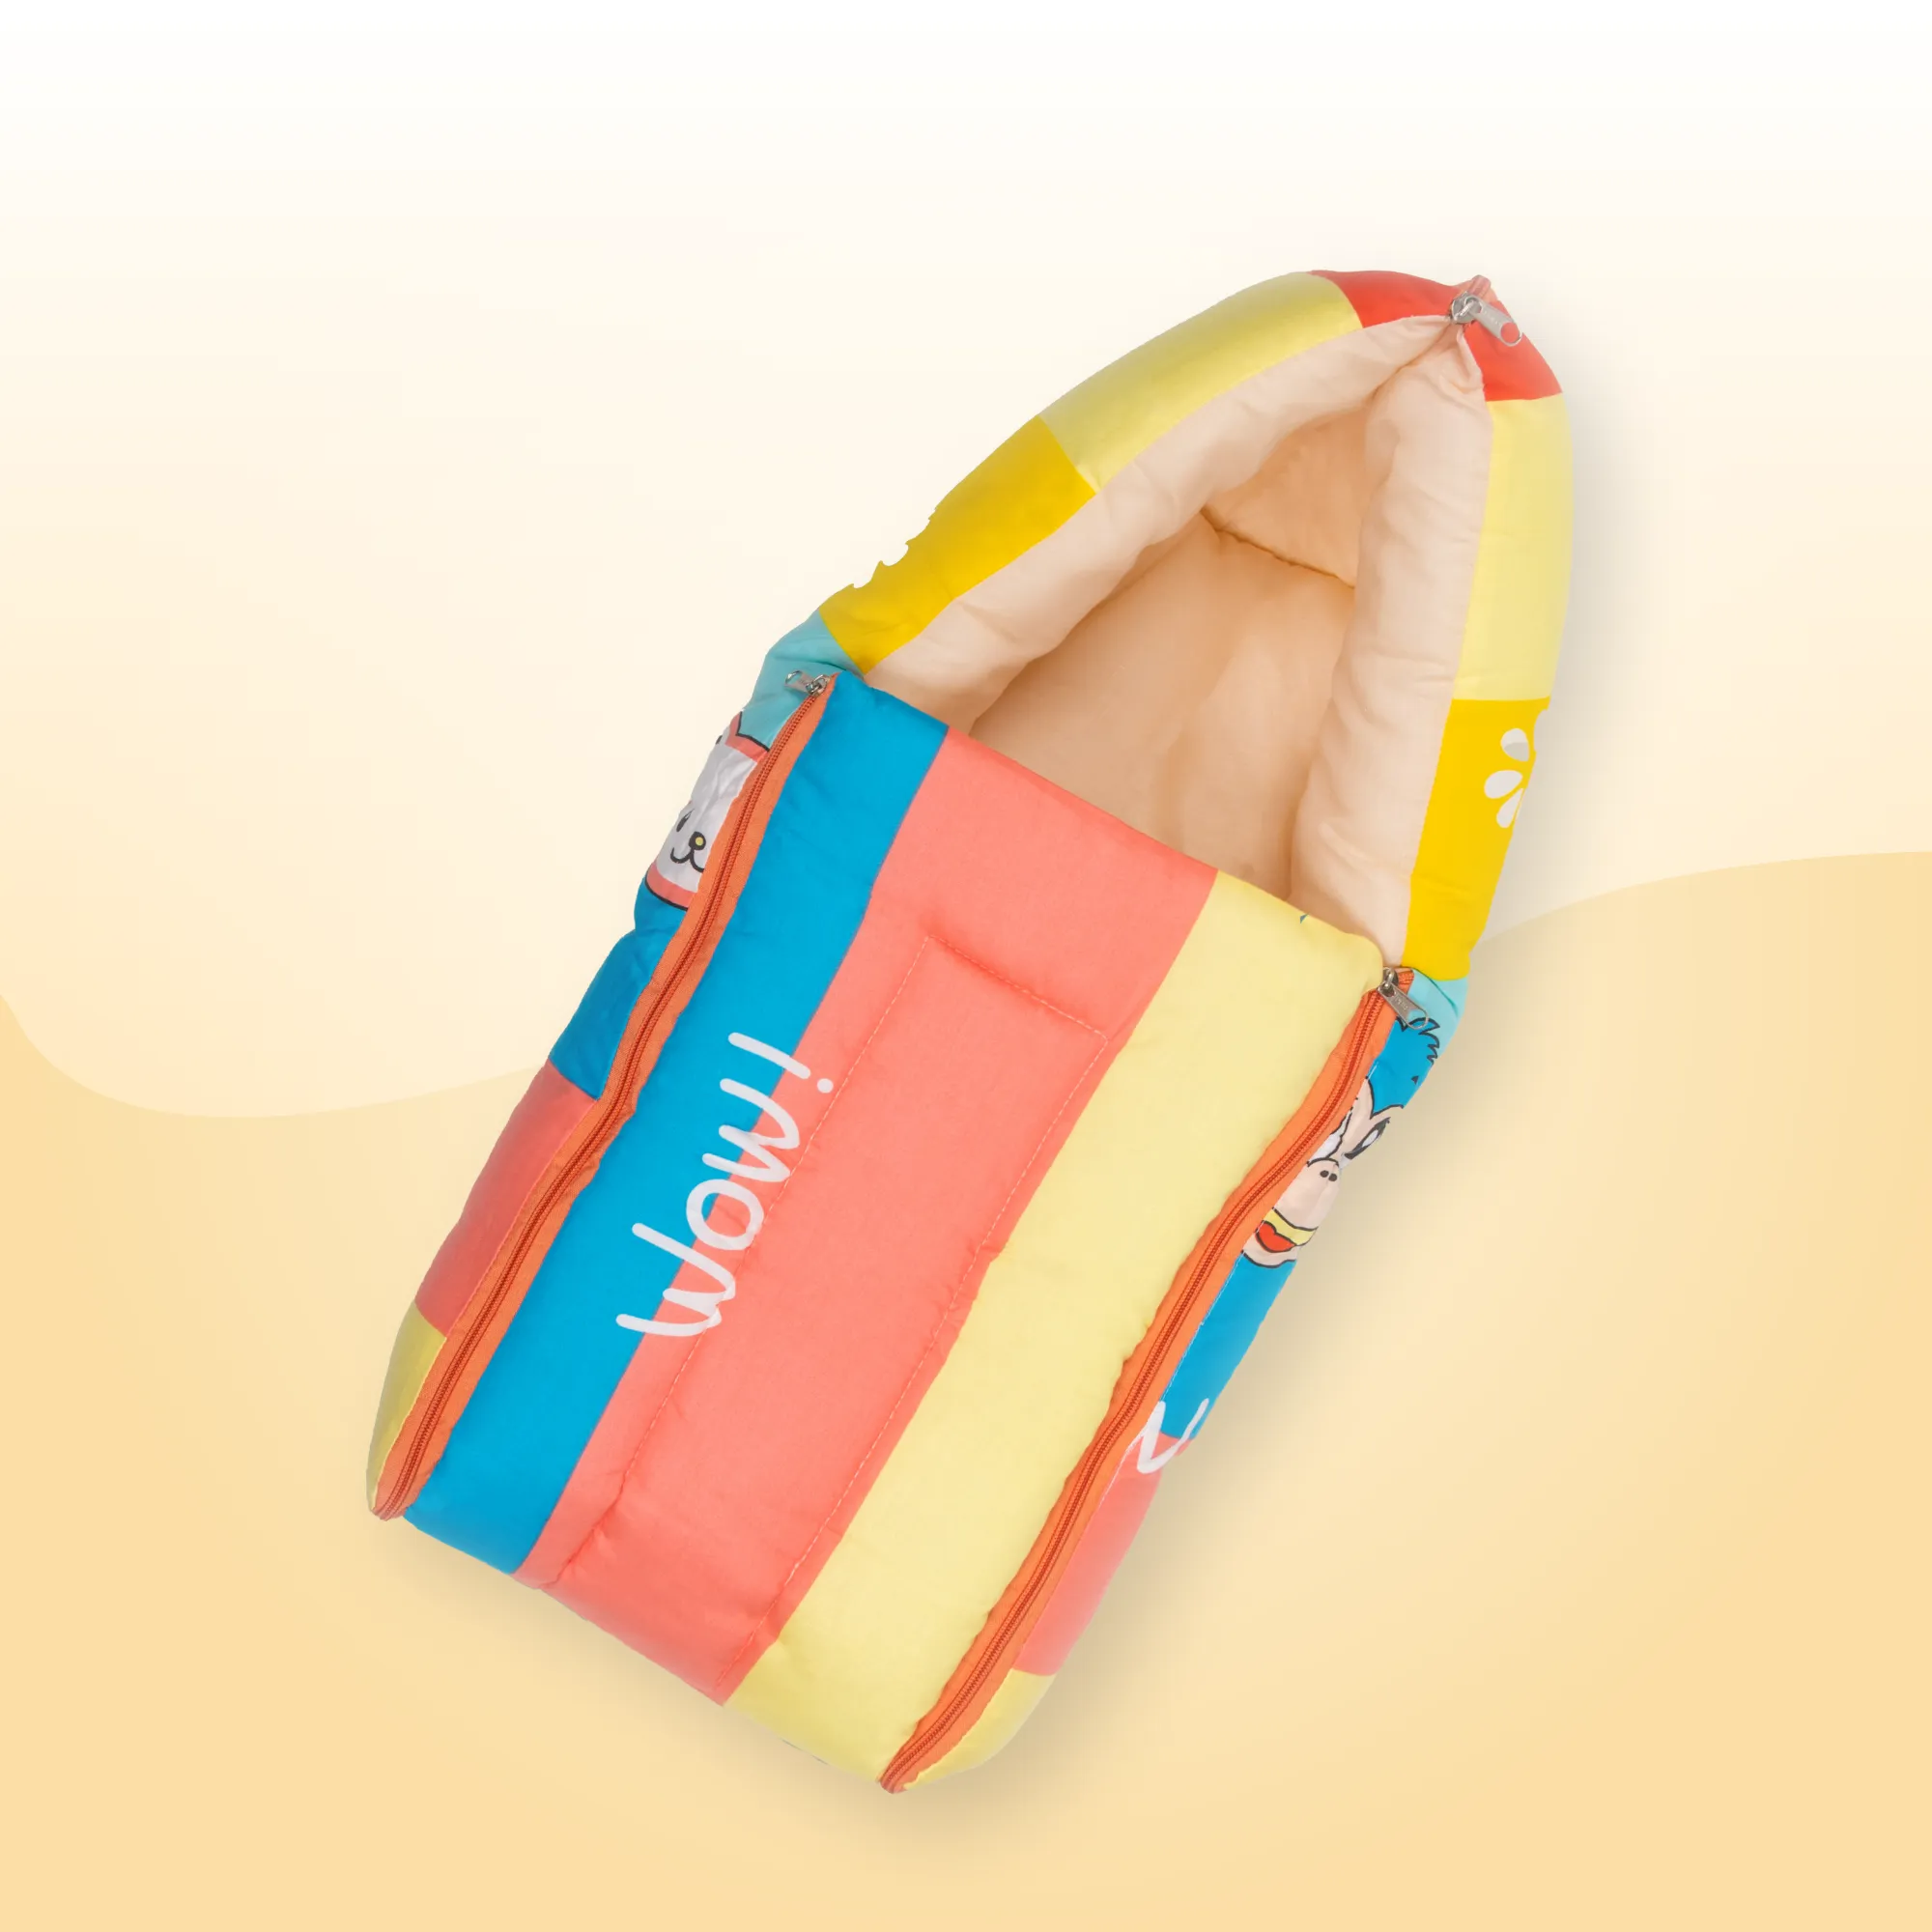 Baby 4–in-1 Soft & Snuggly Baby Sleeping Bag/Baby Carry Nest with 3-way Zip Opening | Soft & Breathable | Head-to-toe comfort - Magical Rainbow